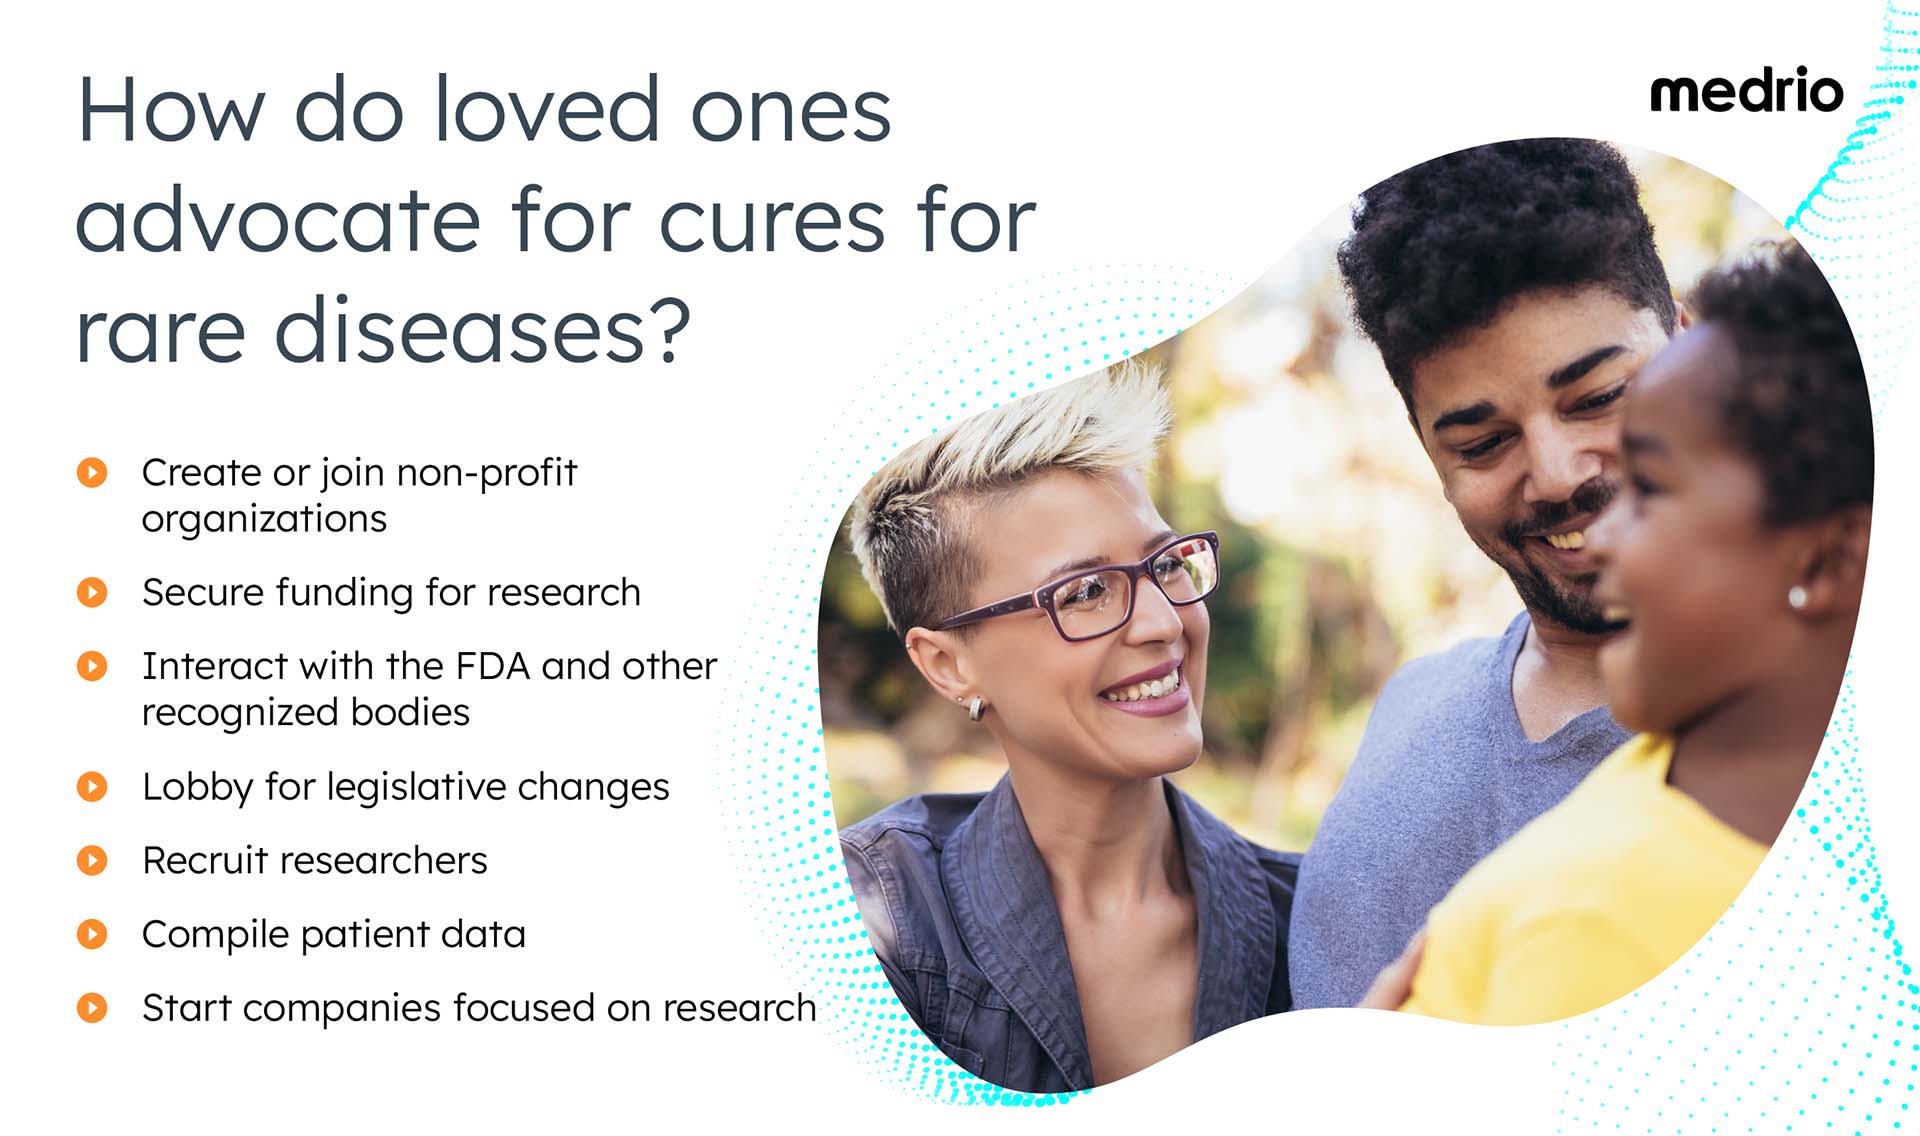 Image of bulleted list depicting how loves ones advocate for rare disease cures